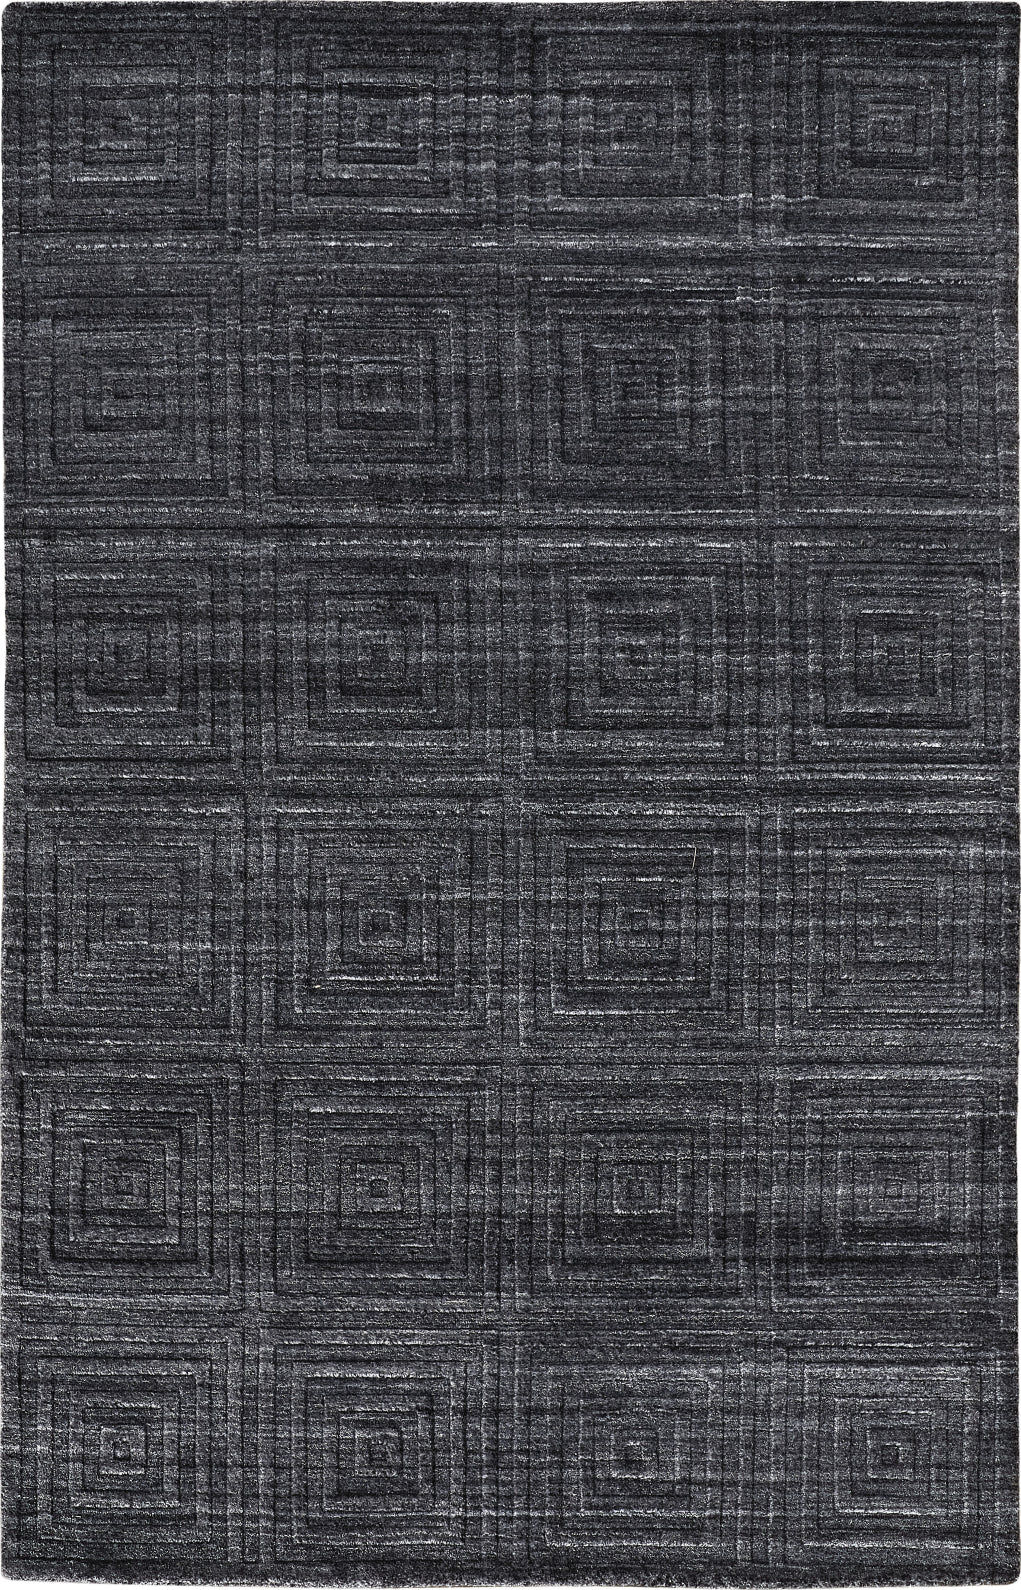 Feizy Redford 8670F Charcoal Area Rug main image